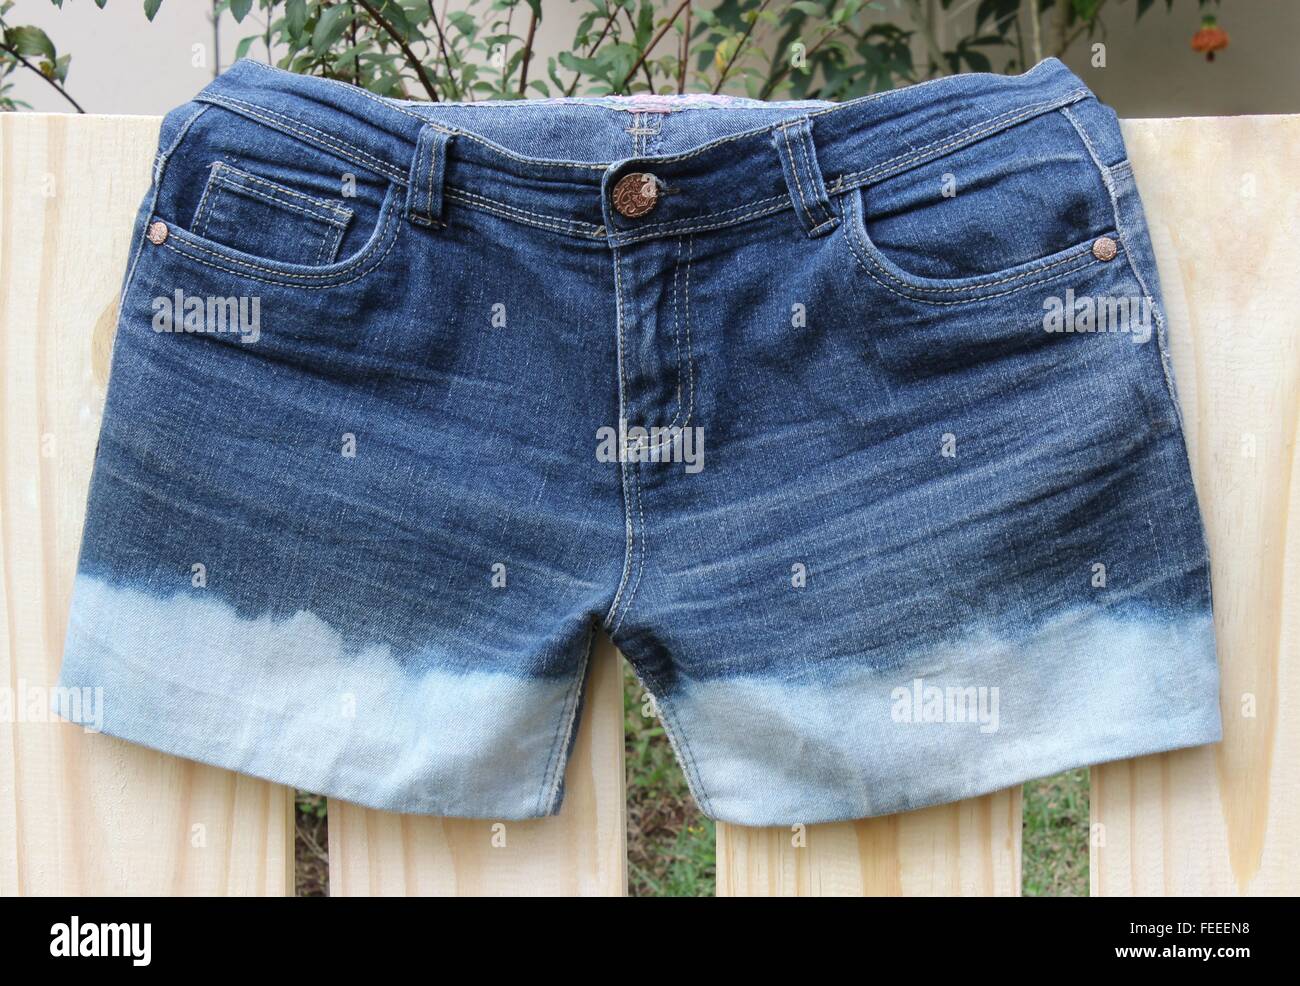 Short jeans after applying bleach, presented discoloration. Stock Photo